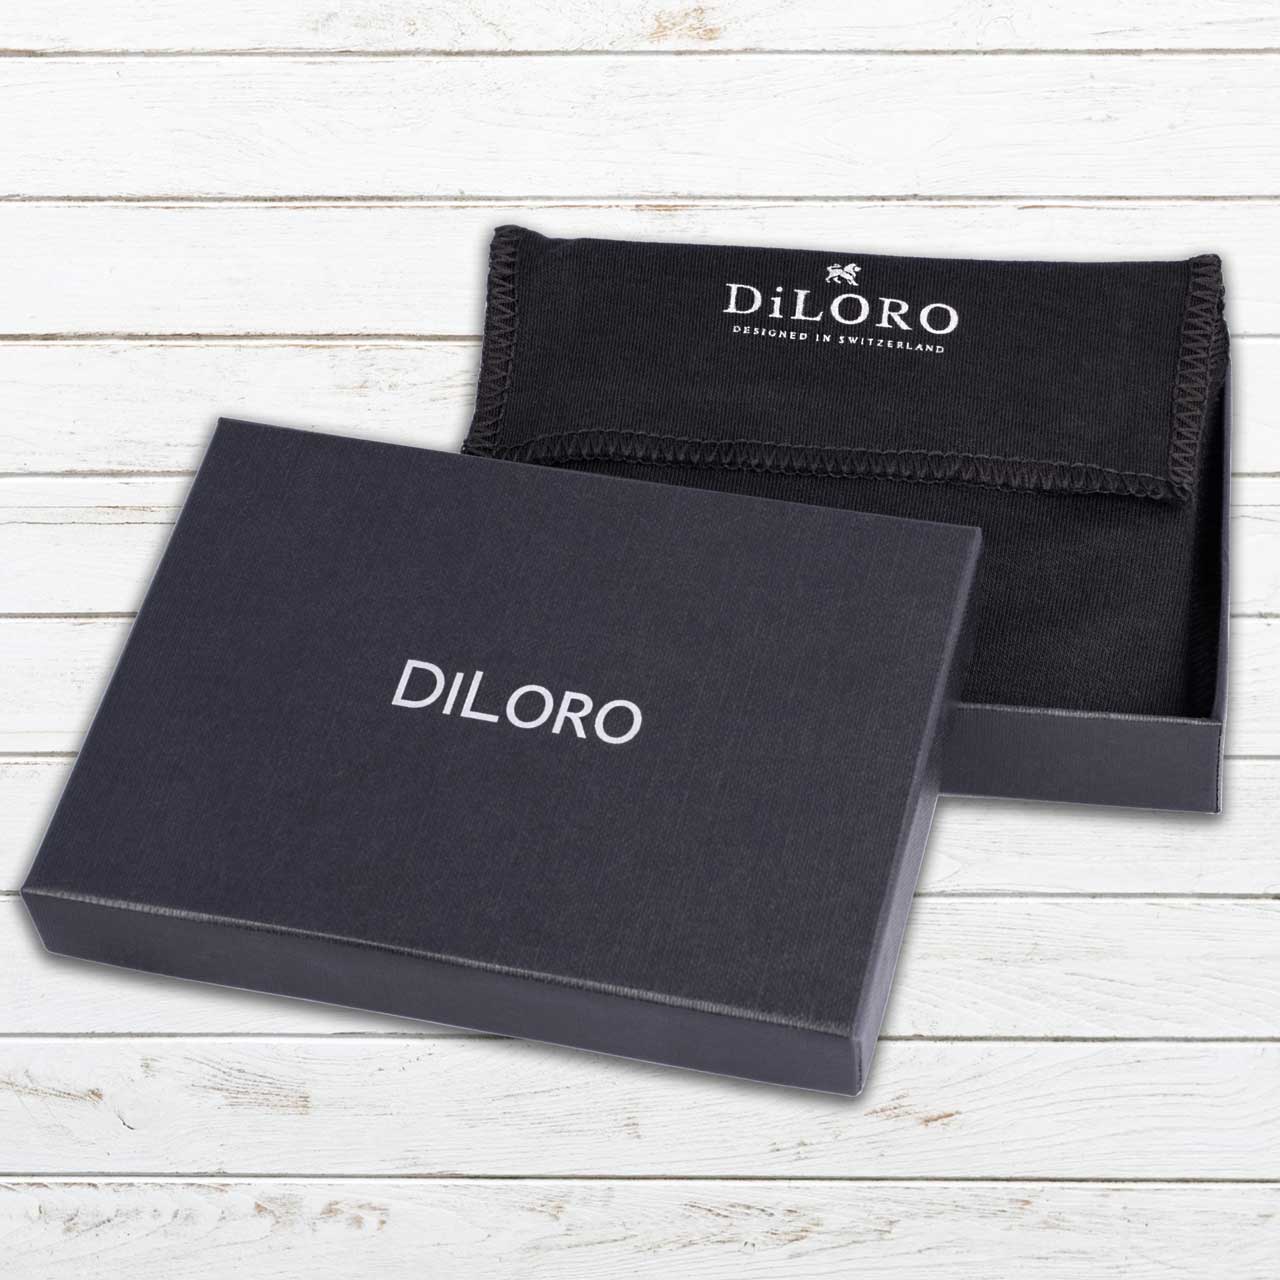 DiLoro Men's Bifold Leather Wallet Lugano Collection Bugatti Tan with Dust Bag and Gift Box